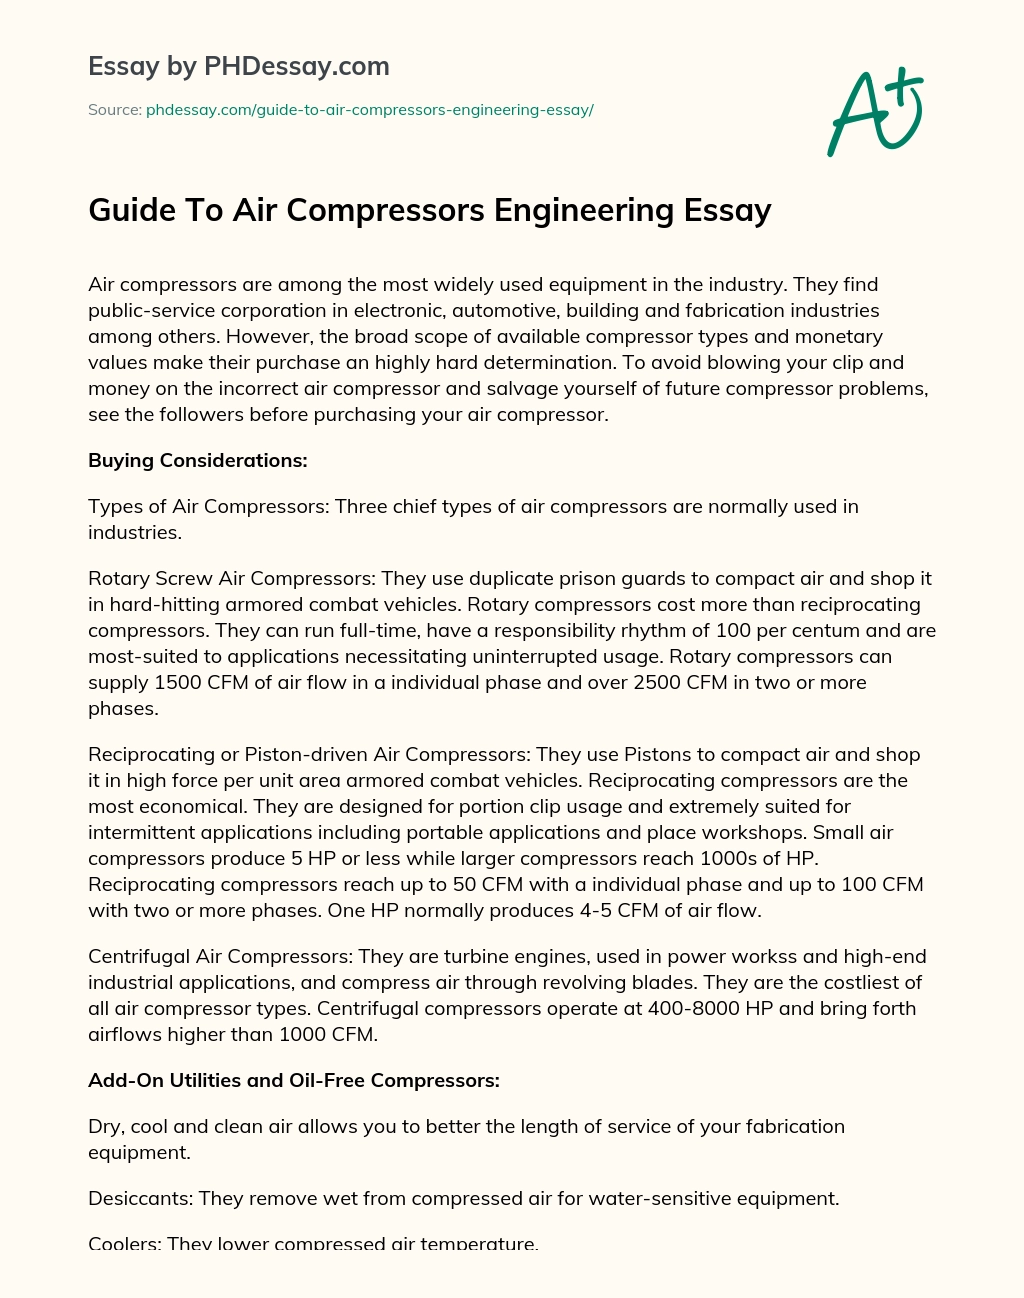 Guide To Air Compressors Engineering Essay essay